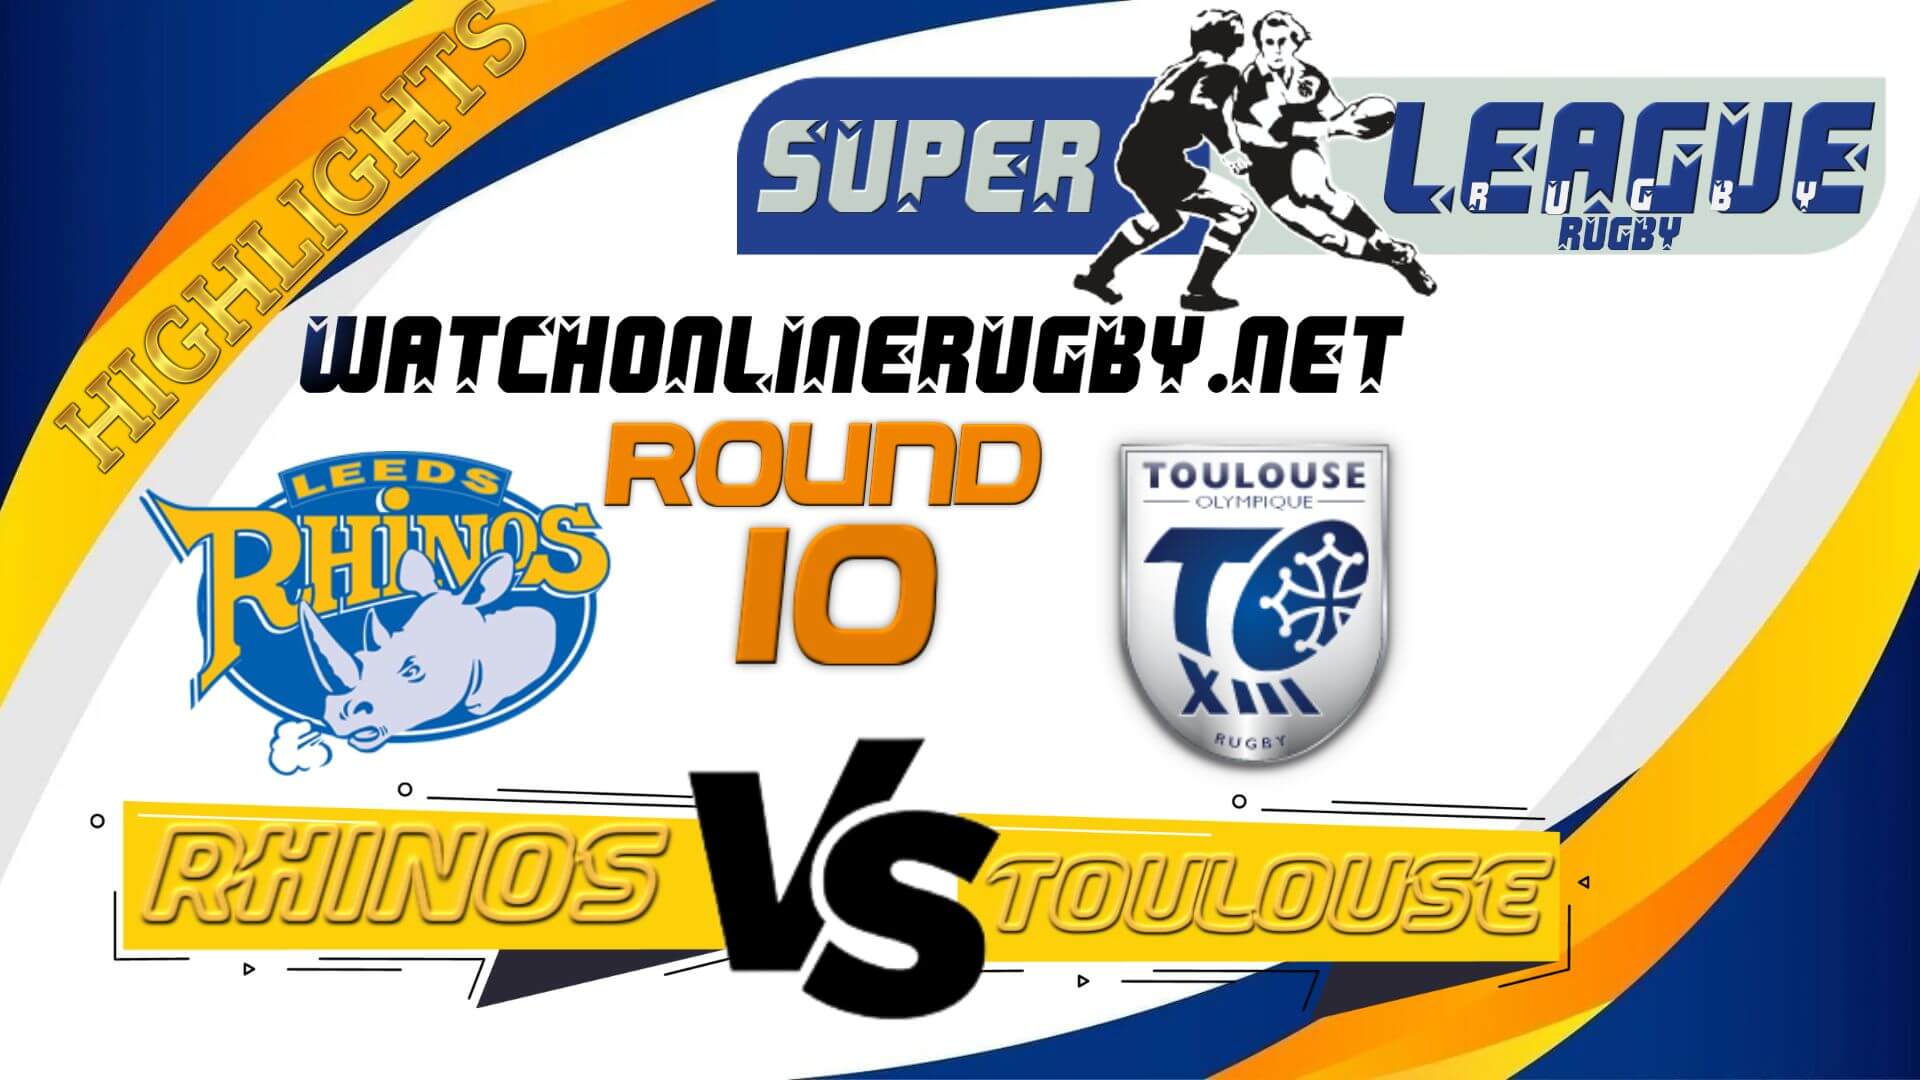 Leeds Rhinos Vs Toulouse Super League Rugby 2022 RD 10